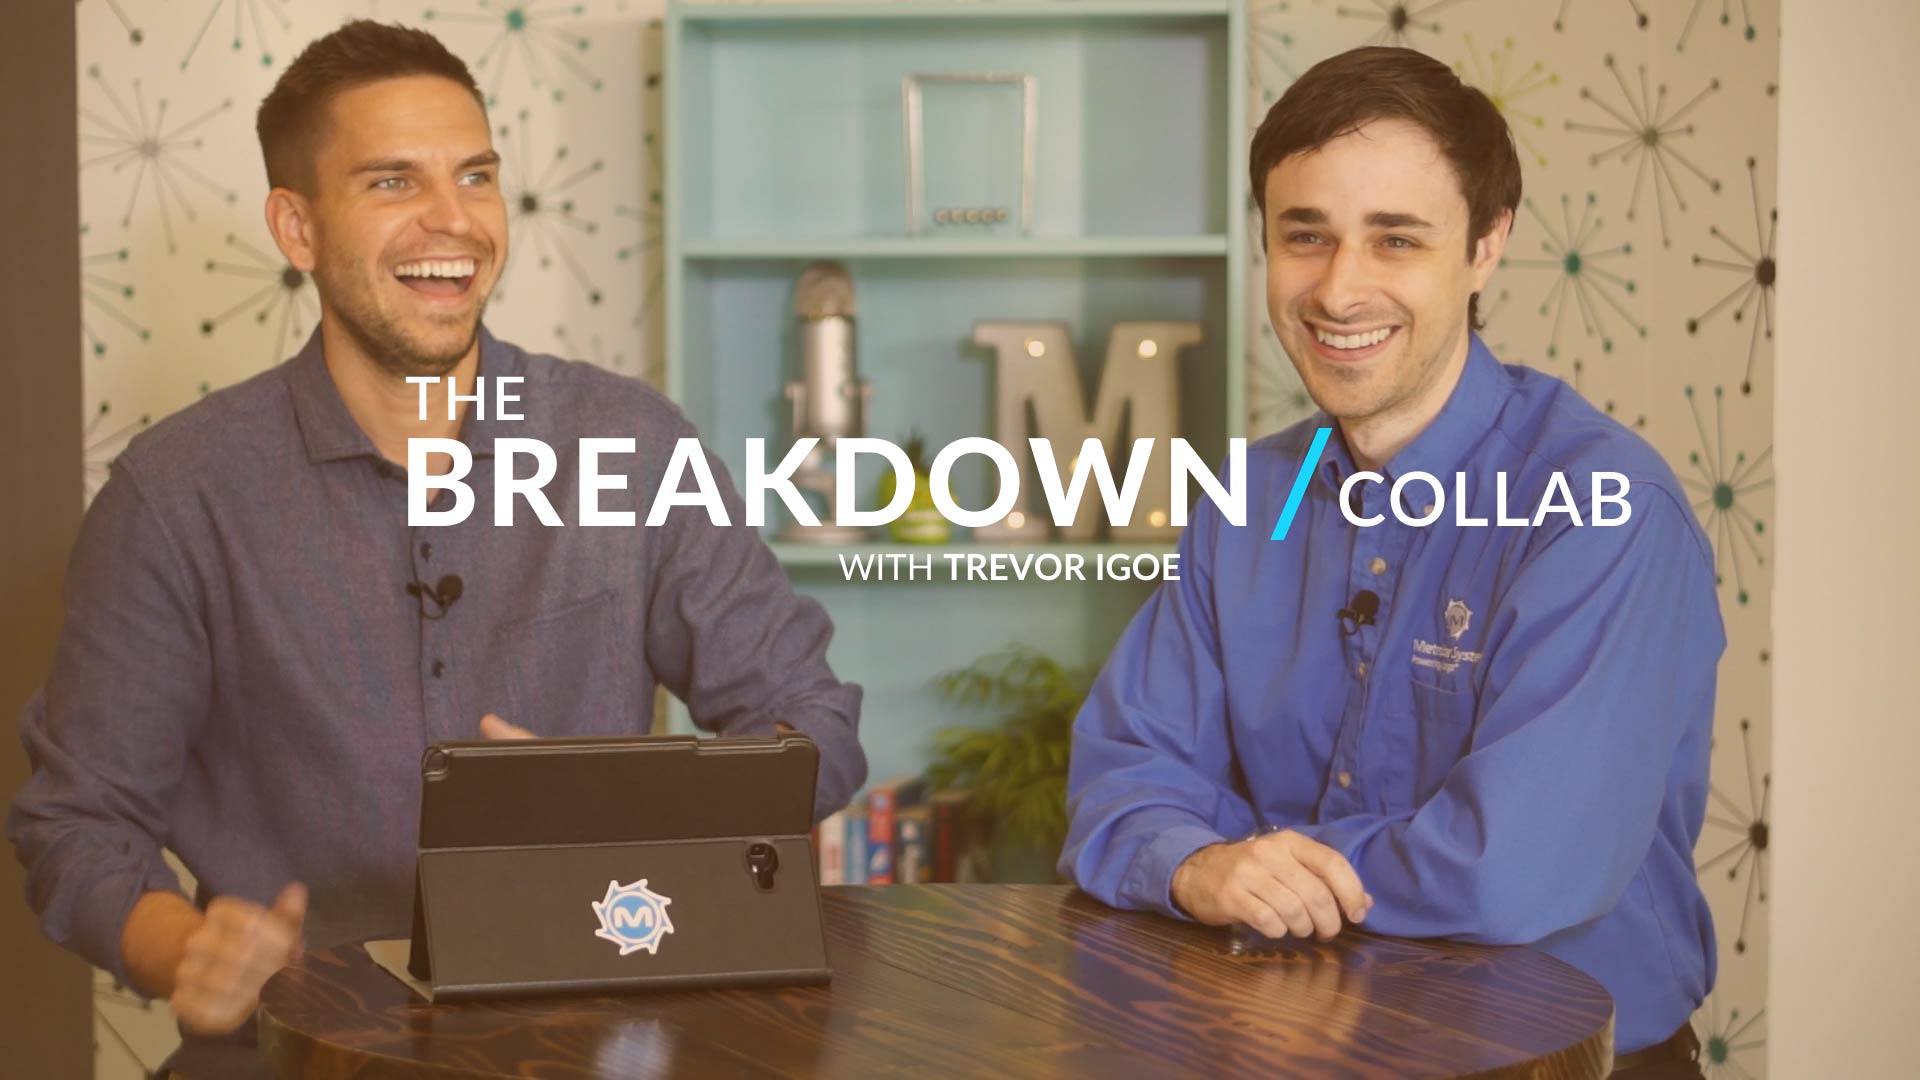 The Breakdown: Collaboration and Technology in the Enterprise